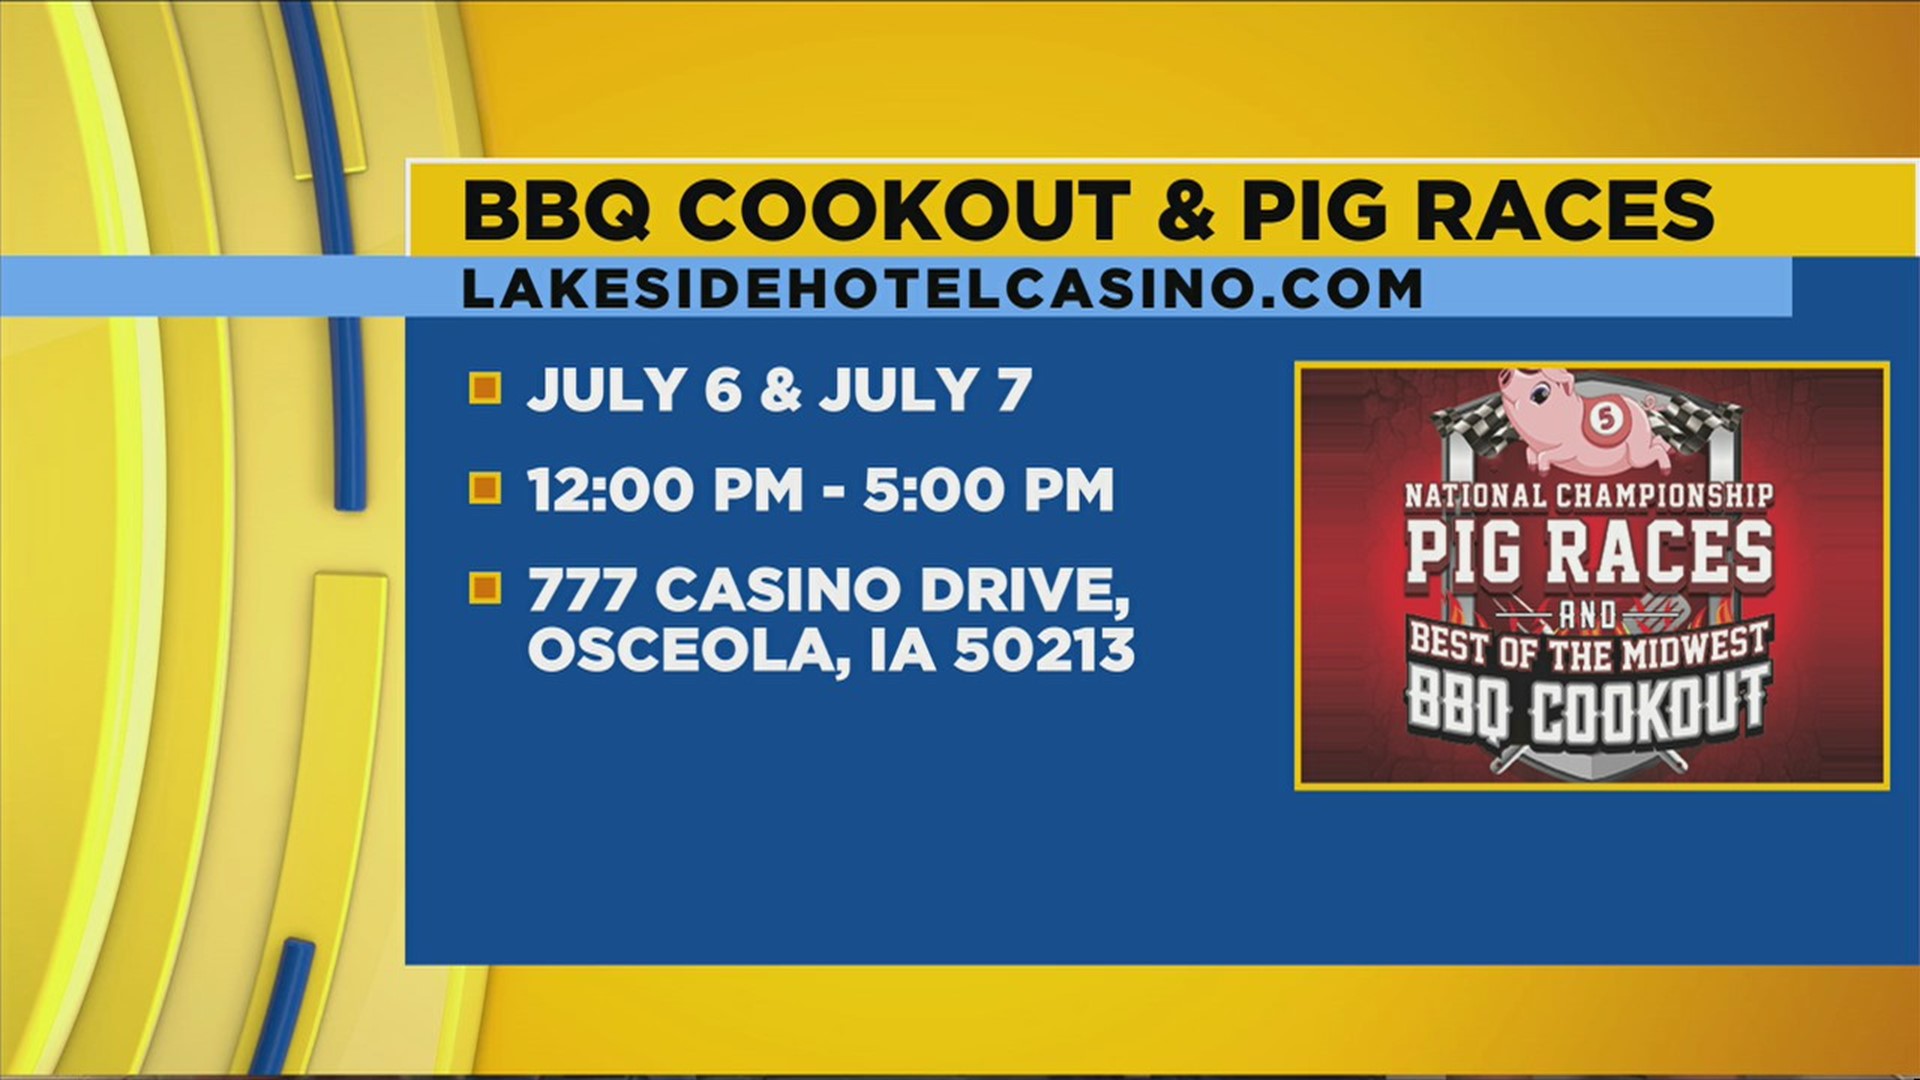 Lakeside Casino BBQ Cookout & Pig Races